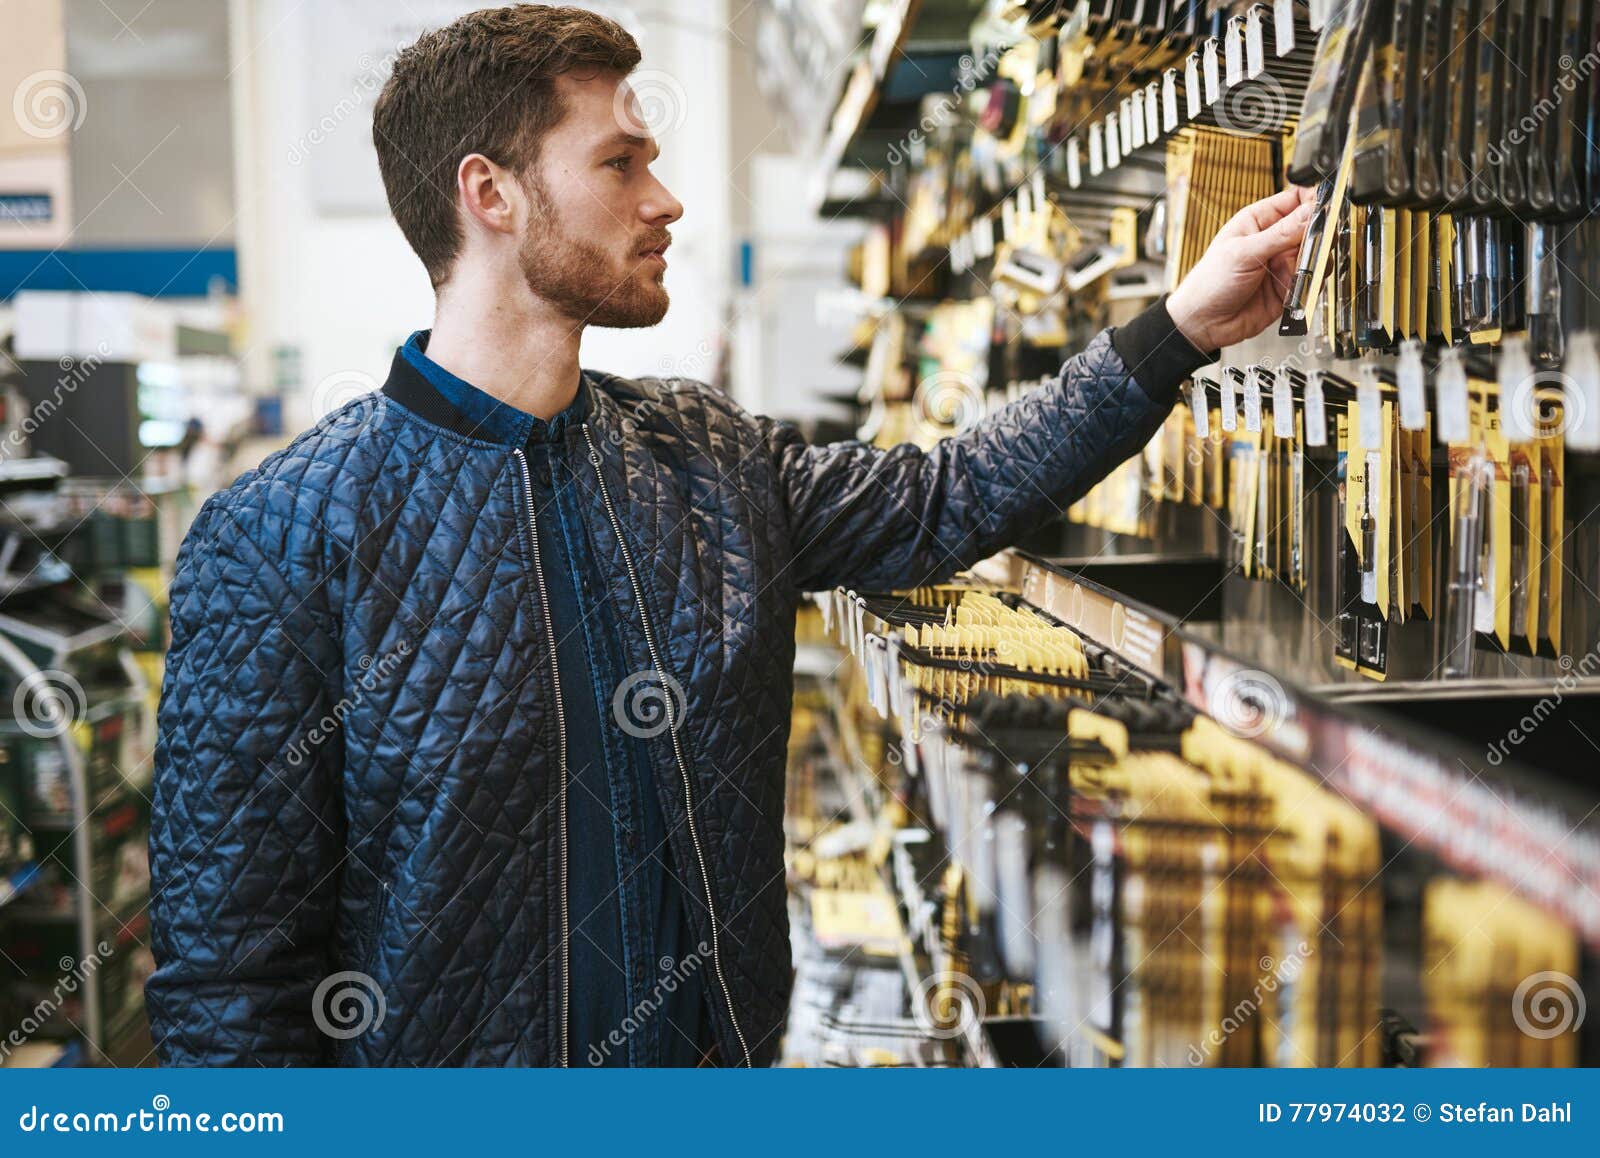 bearded young man in a hardware store